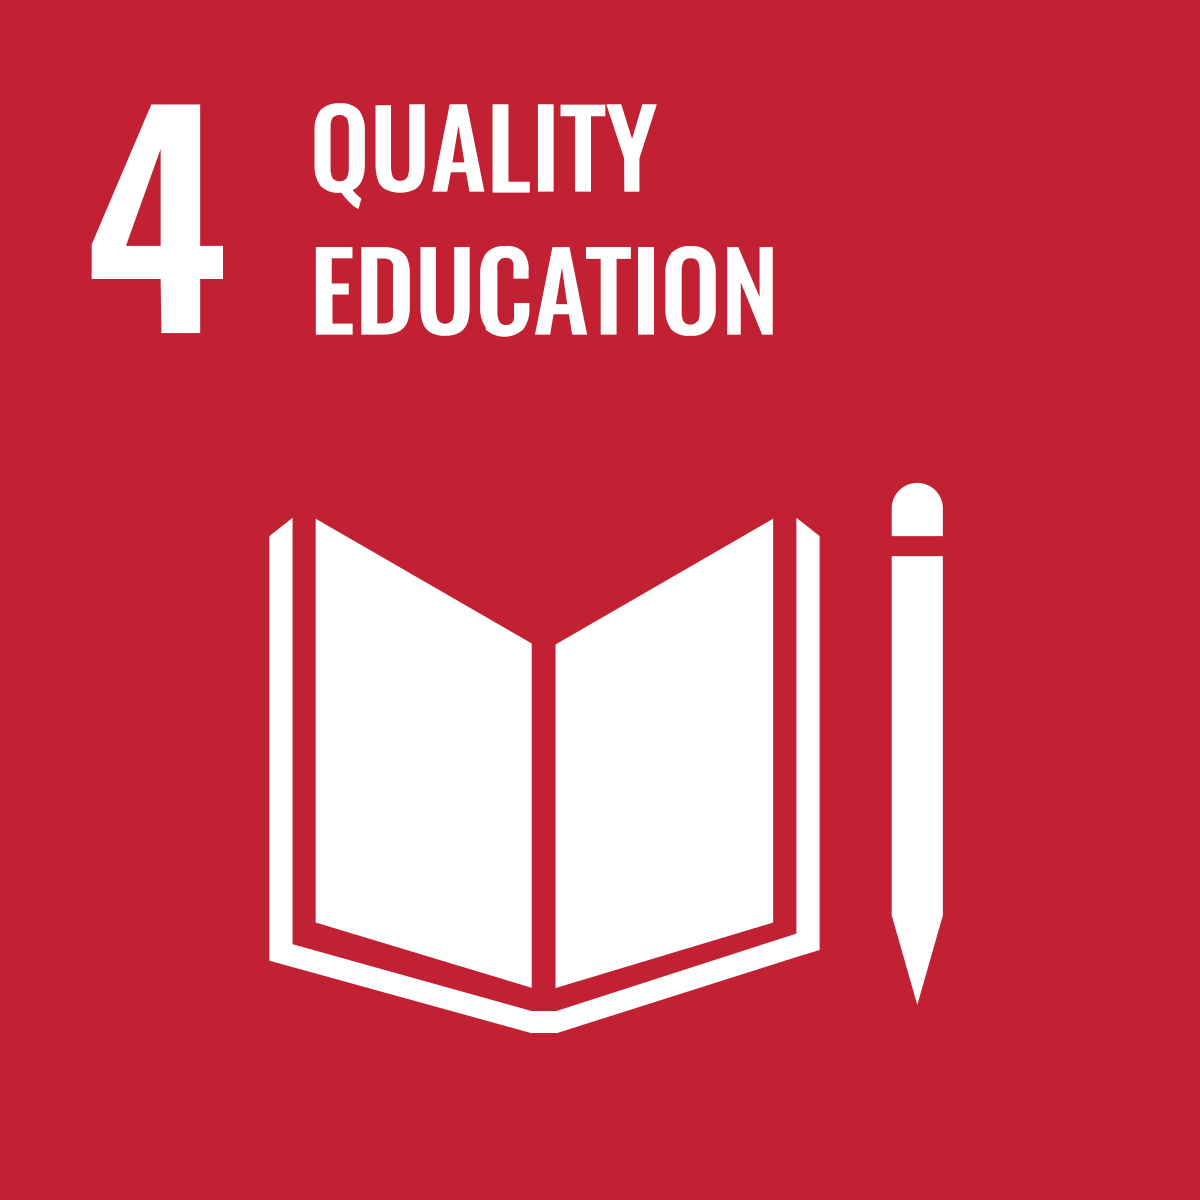 Sustainable_Development_Goal_04QualityEducation.svg.png